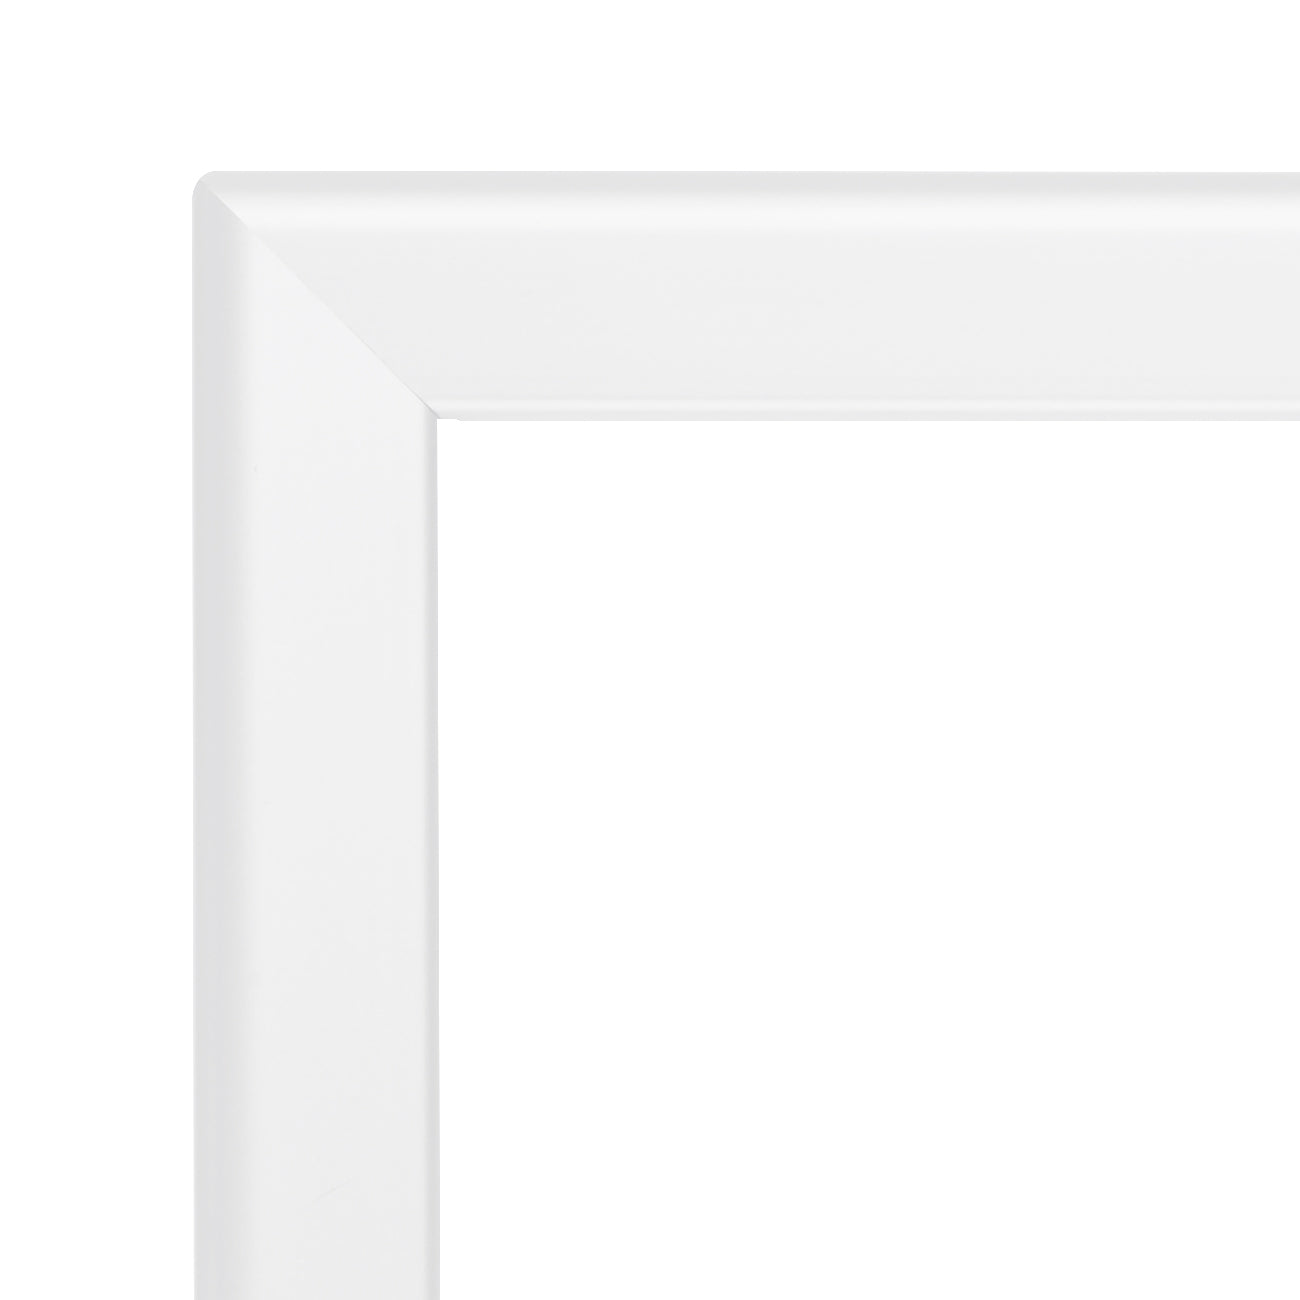 Load image into Gallery viewer, 27x41 White SnapeZo® Snap Frame - 1.25&amp;quot; Profile
